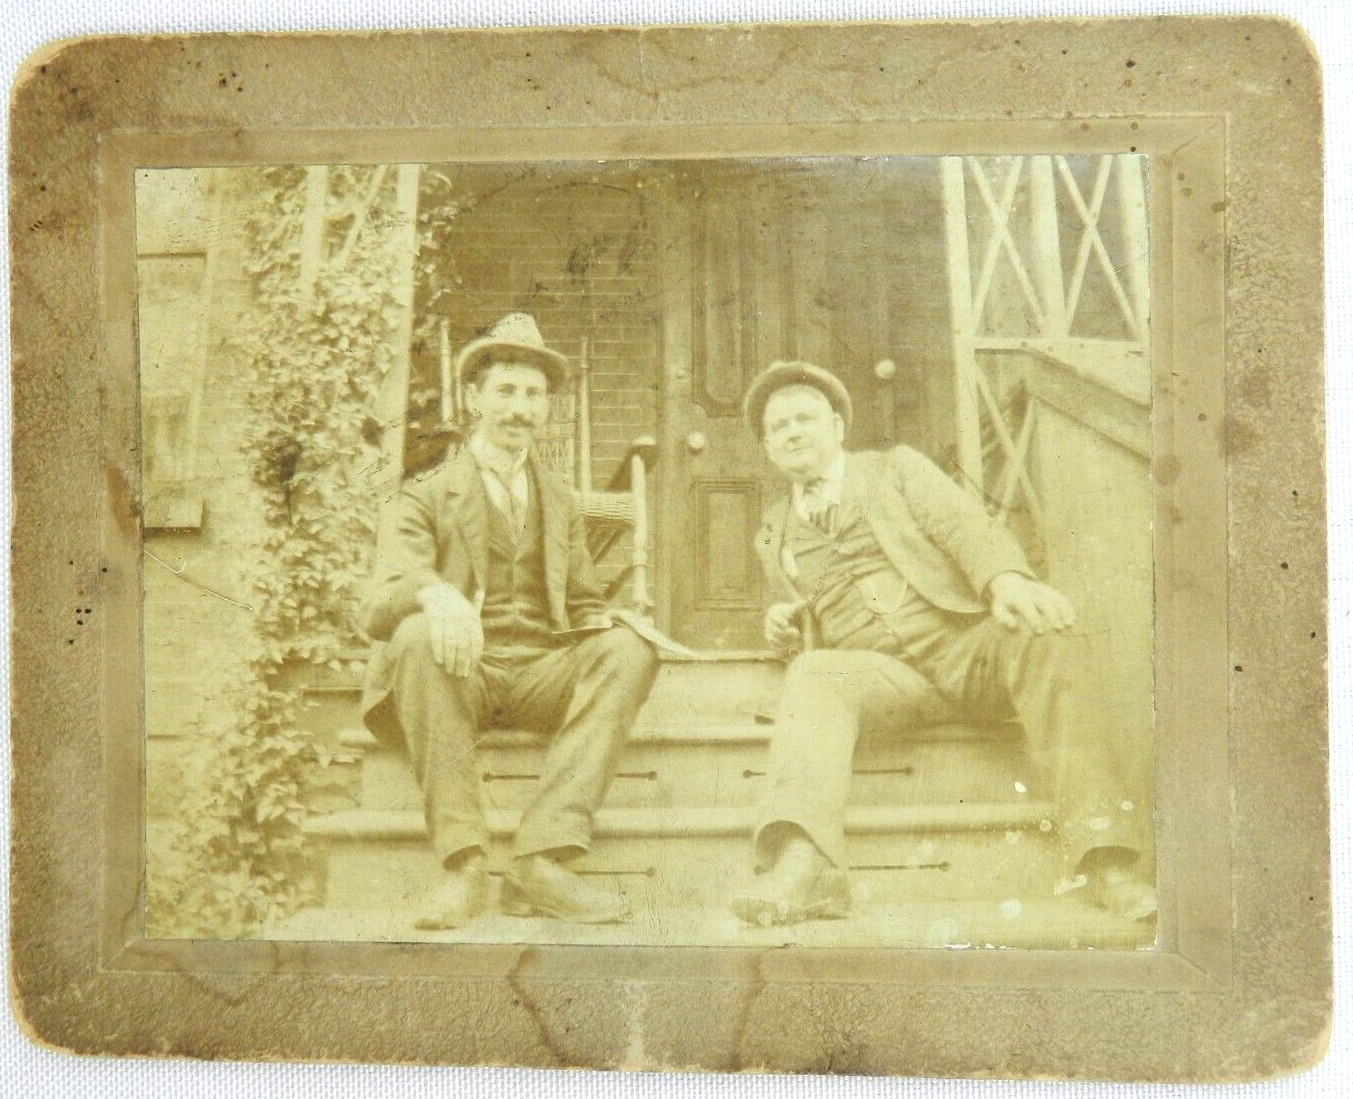 Two Men in Suit with Ties, and Hat Sit on Stairs to Porch - c.1900s Cabinet Card